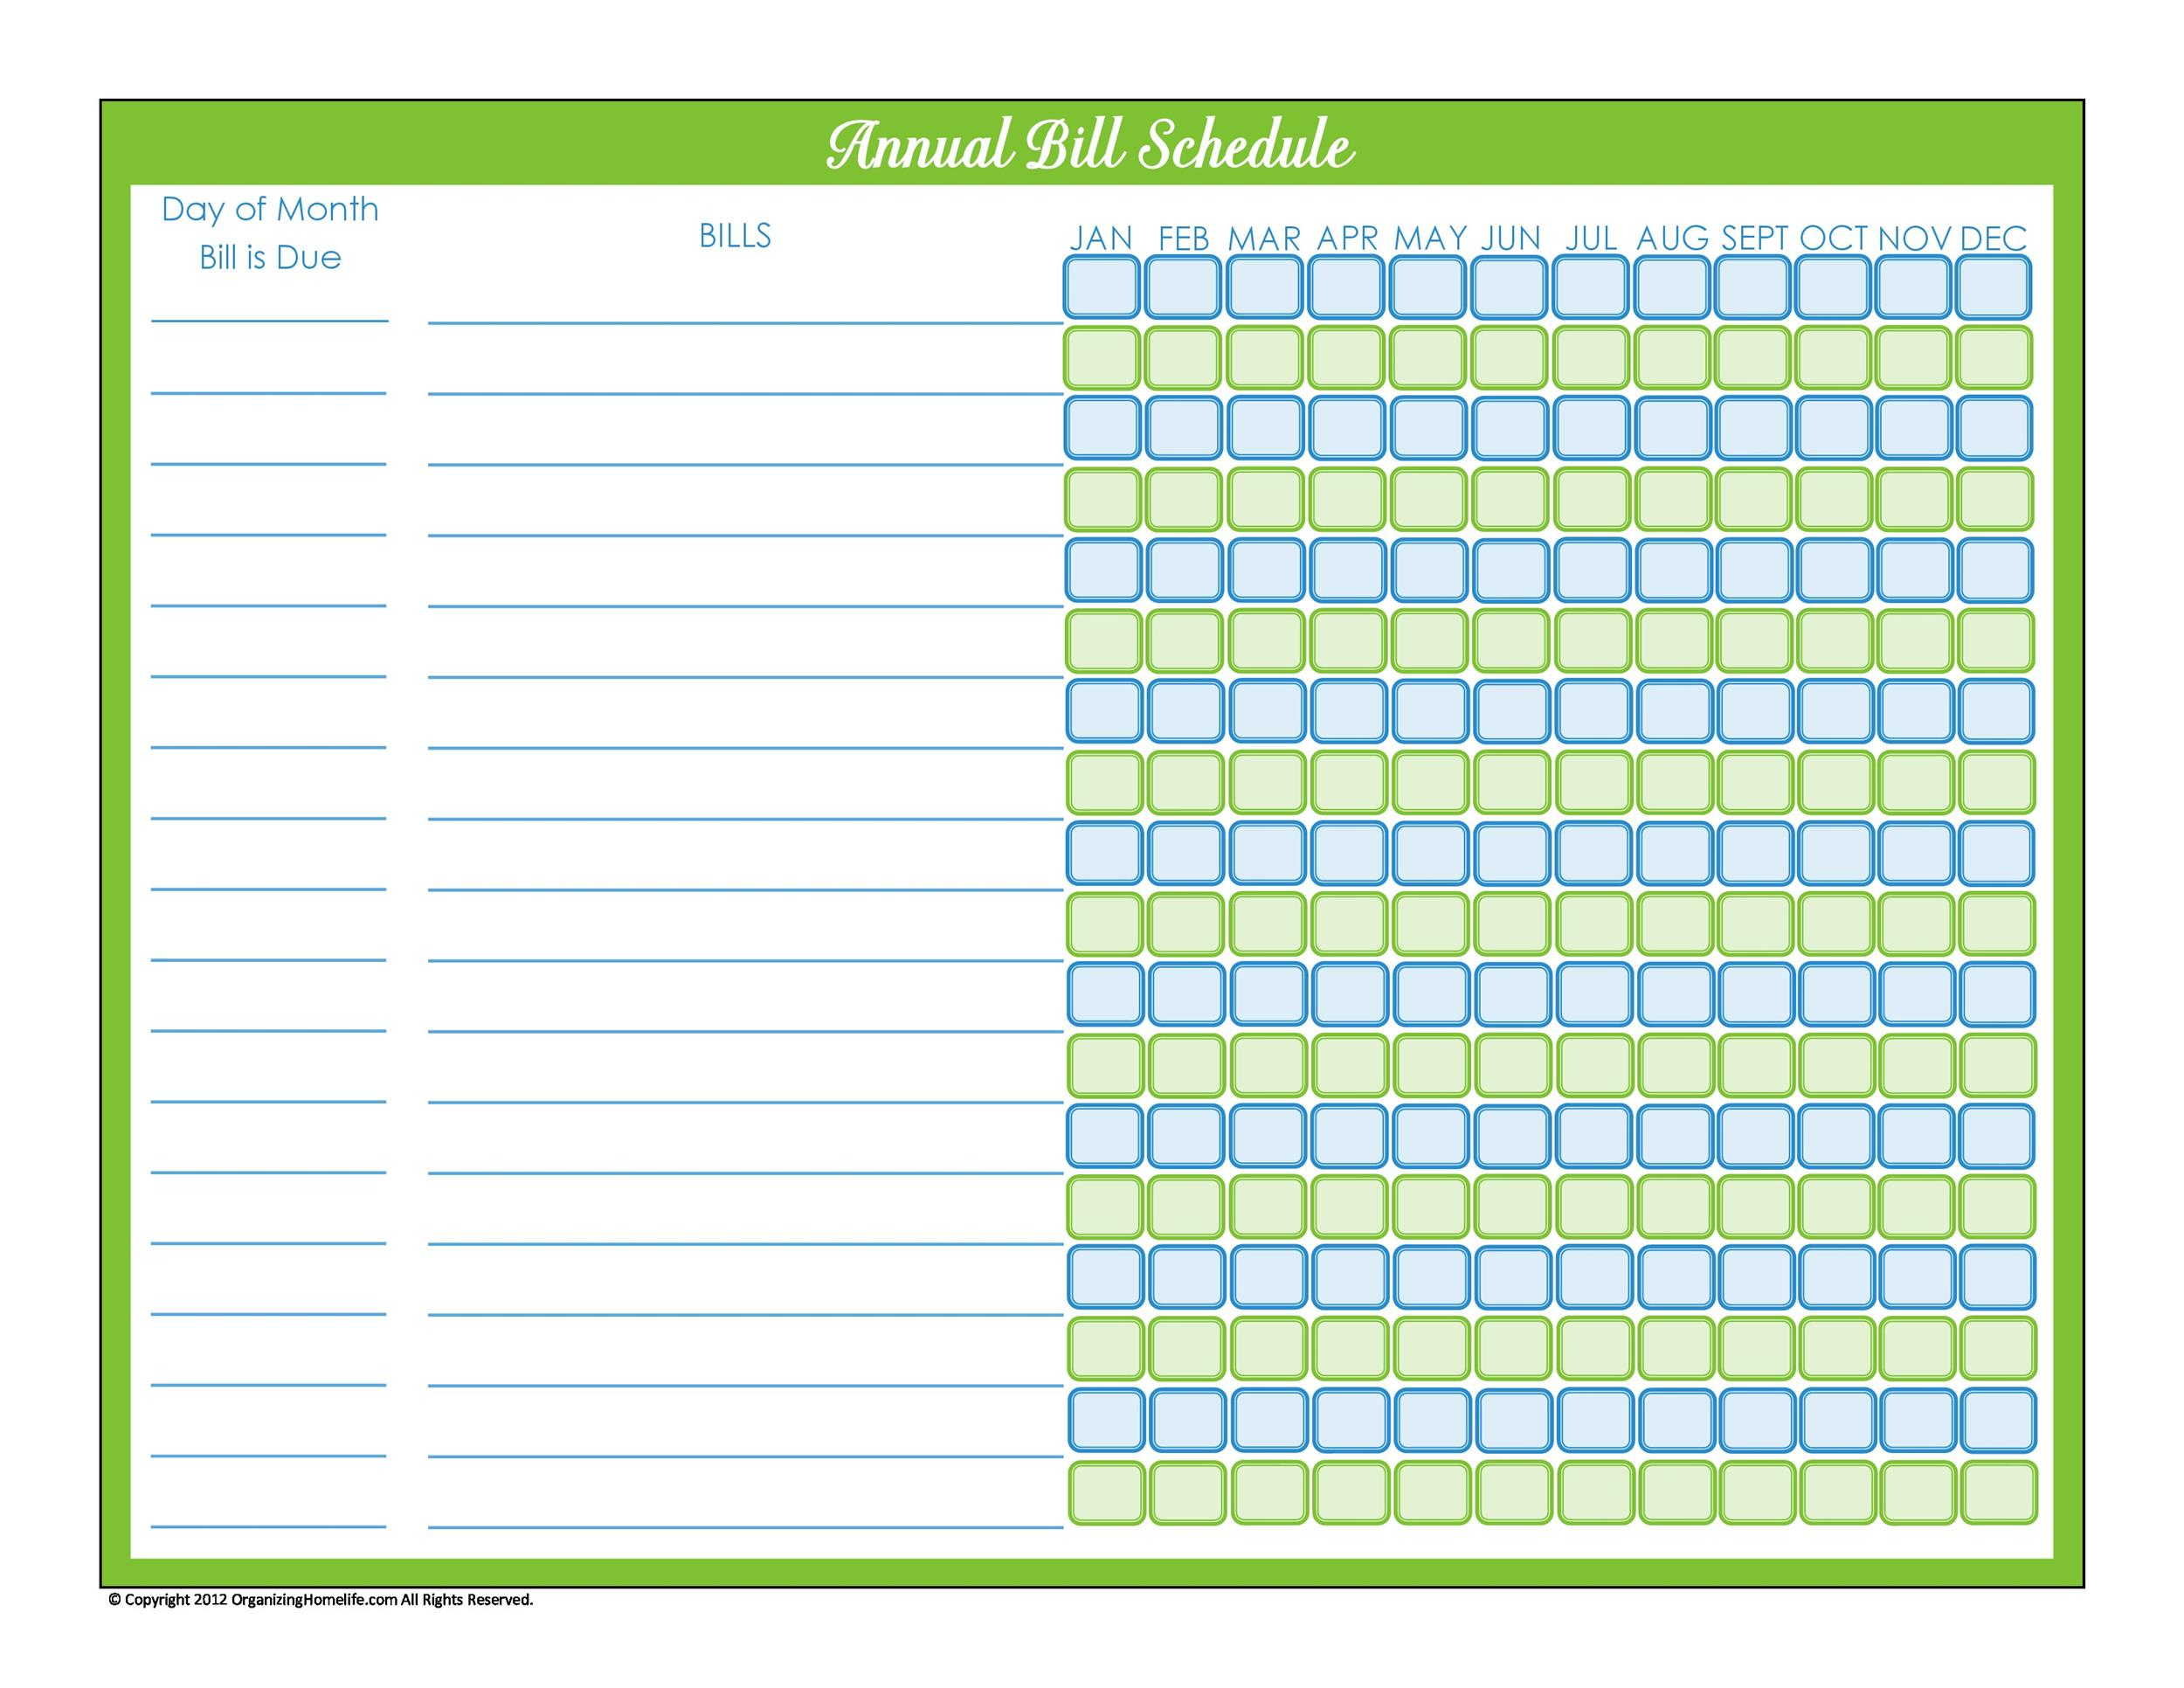 33 Free Bill Pay Checklists &amp; Bill Calendars (Pdf, Word &amp; Excel) throughout Monthly Bill Calendar Template